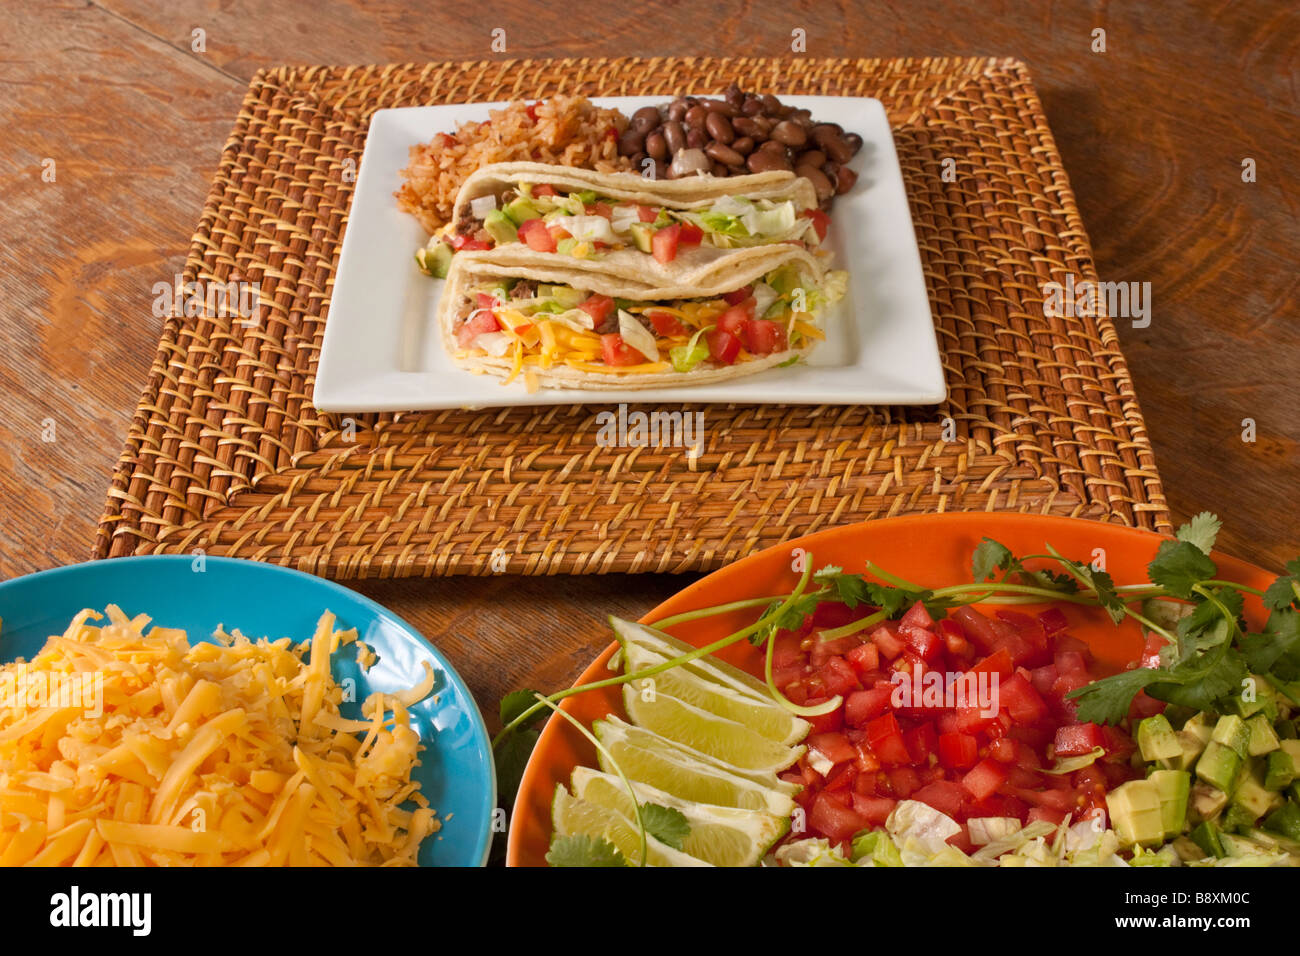 A plate of tacos rice and beans on a bamboo charger with taco ingredients on separate platters Stock Photo